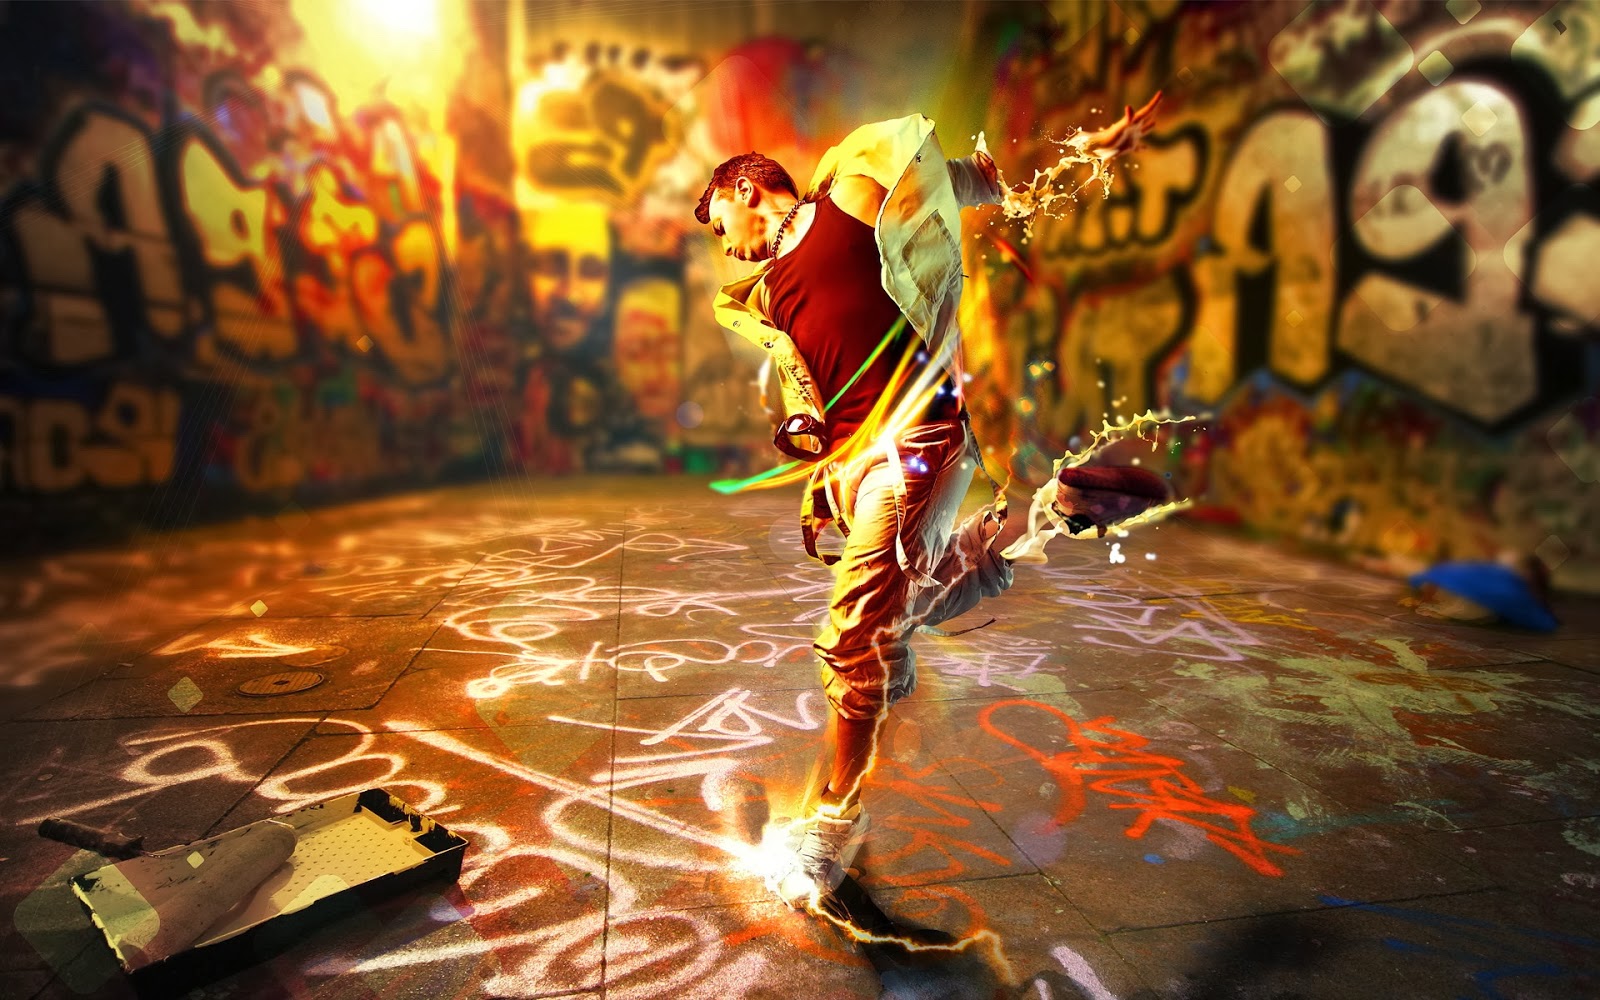 FREE HD PHOTO GALLERY Awesome 3D Street Art Wallpapers Full HD